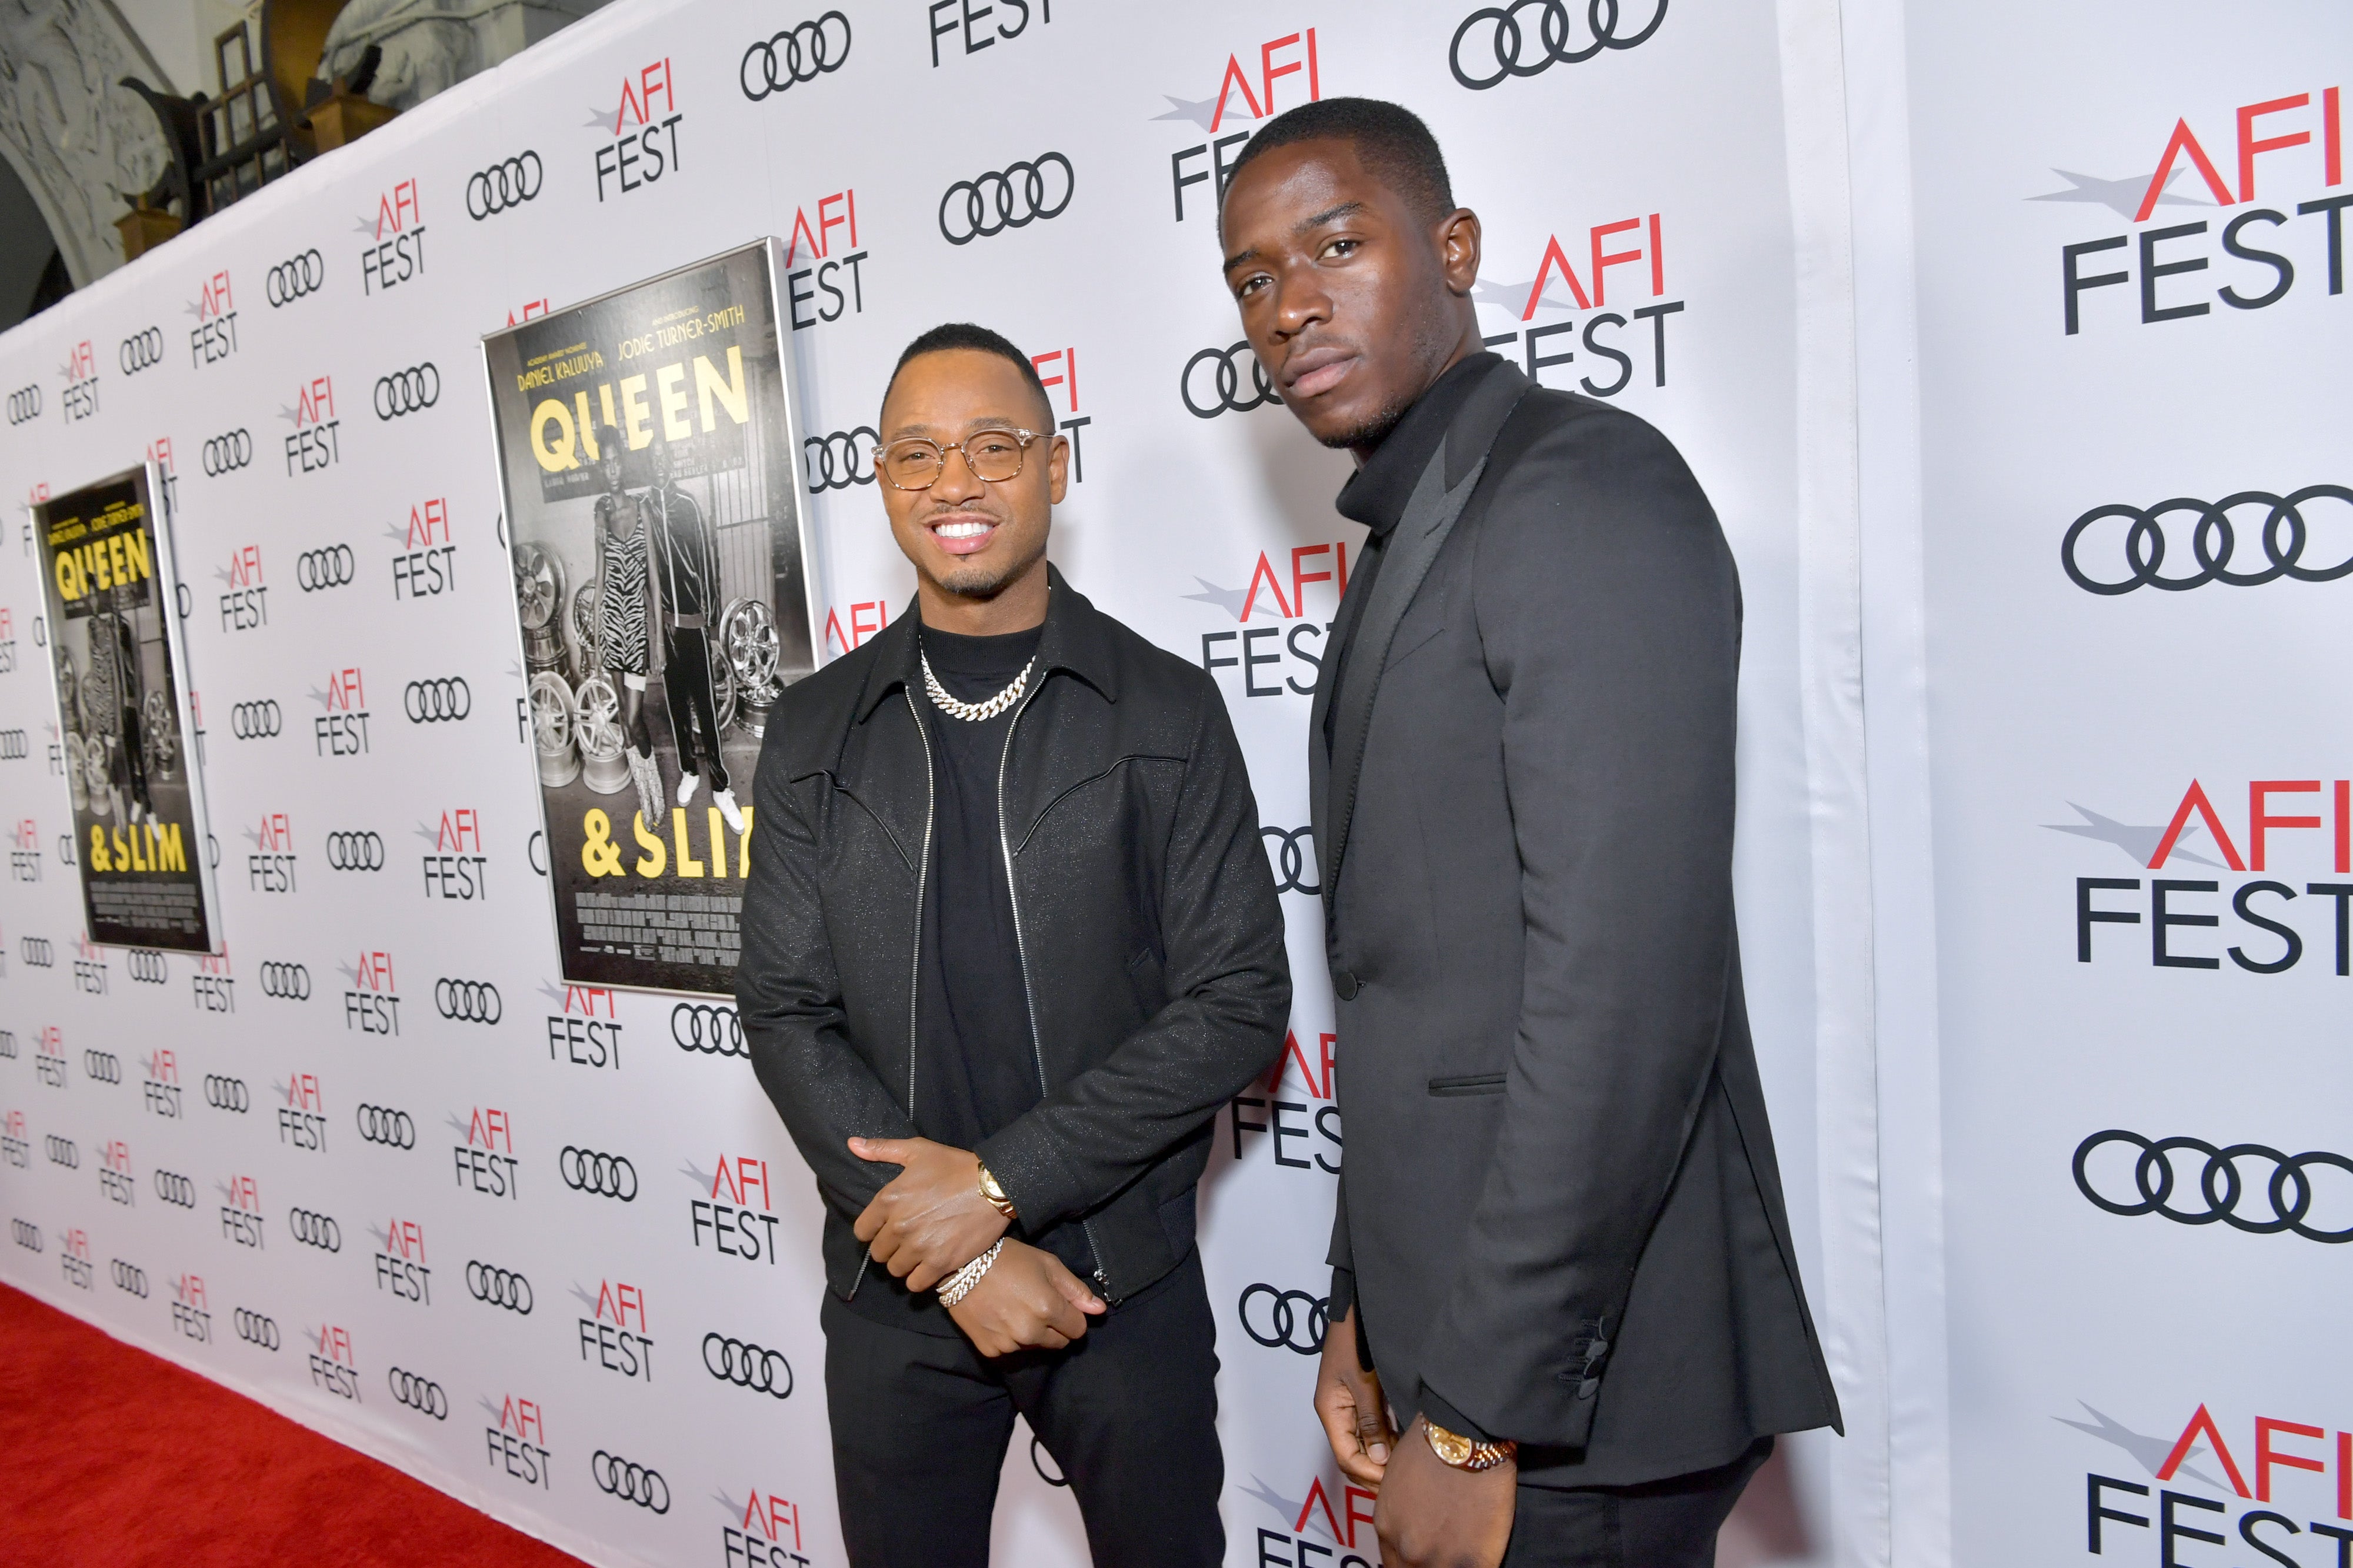 The Premiere Of 'Queen & Slim' Was A Major Star-Studded Event